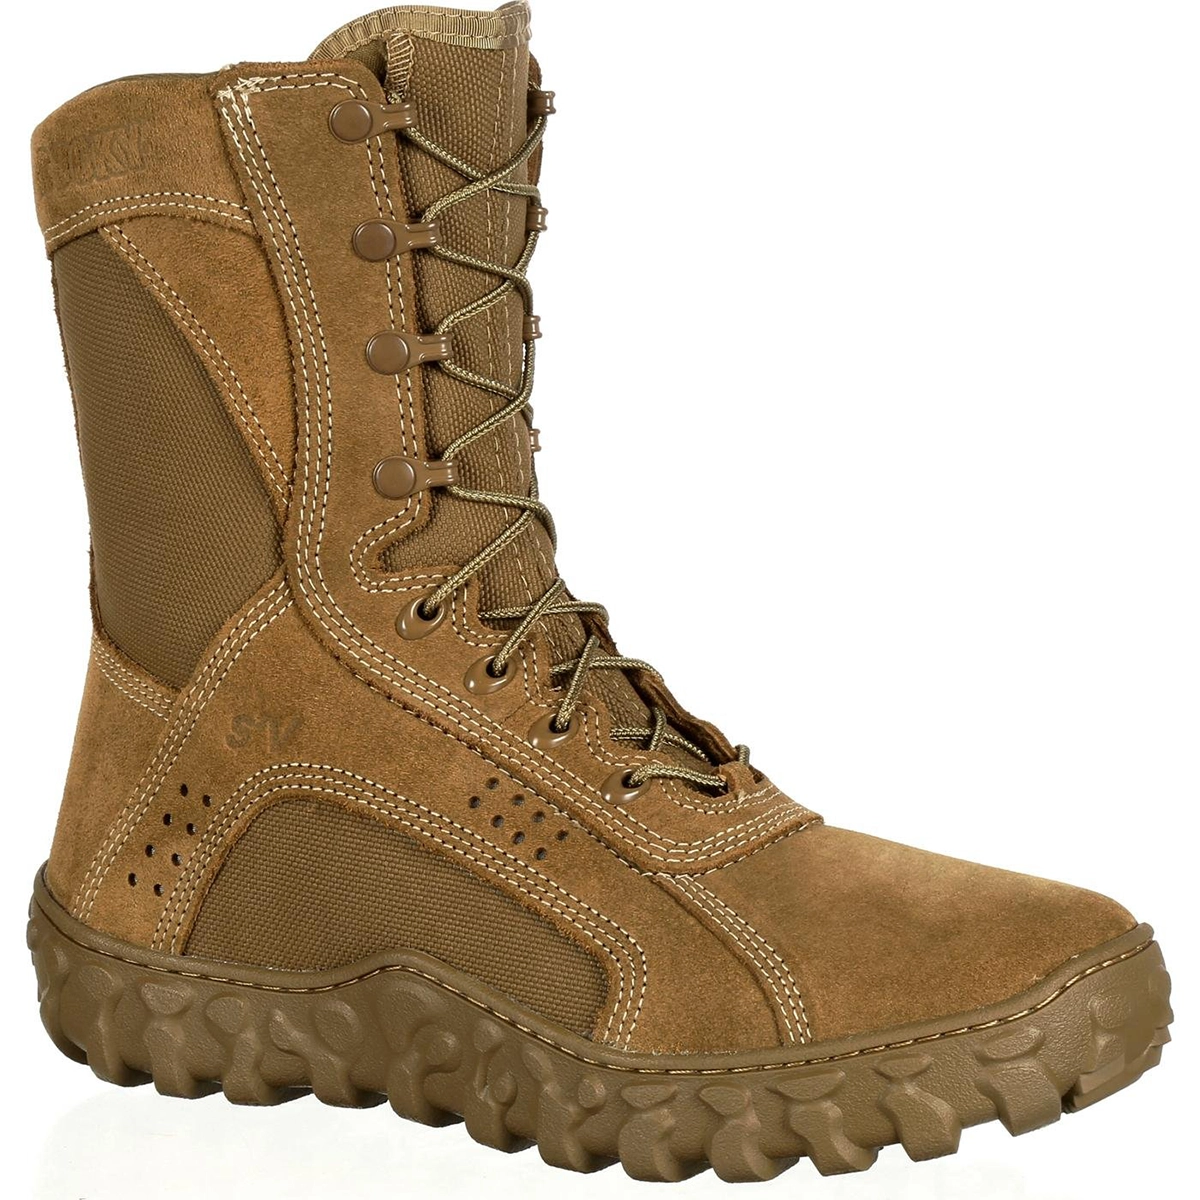 Rocky S2V Tactical Military Boot, 8", Coyote Brown 